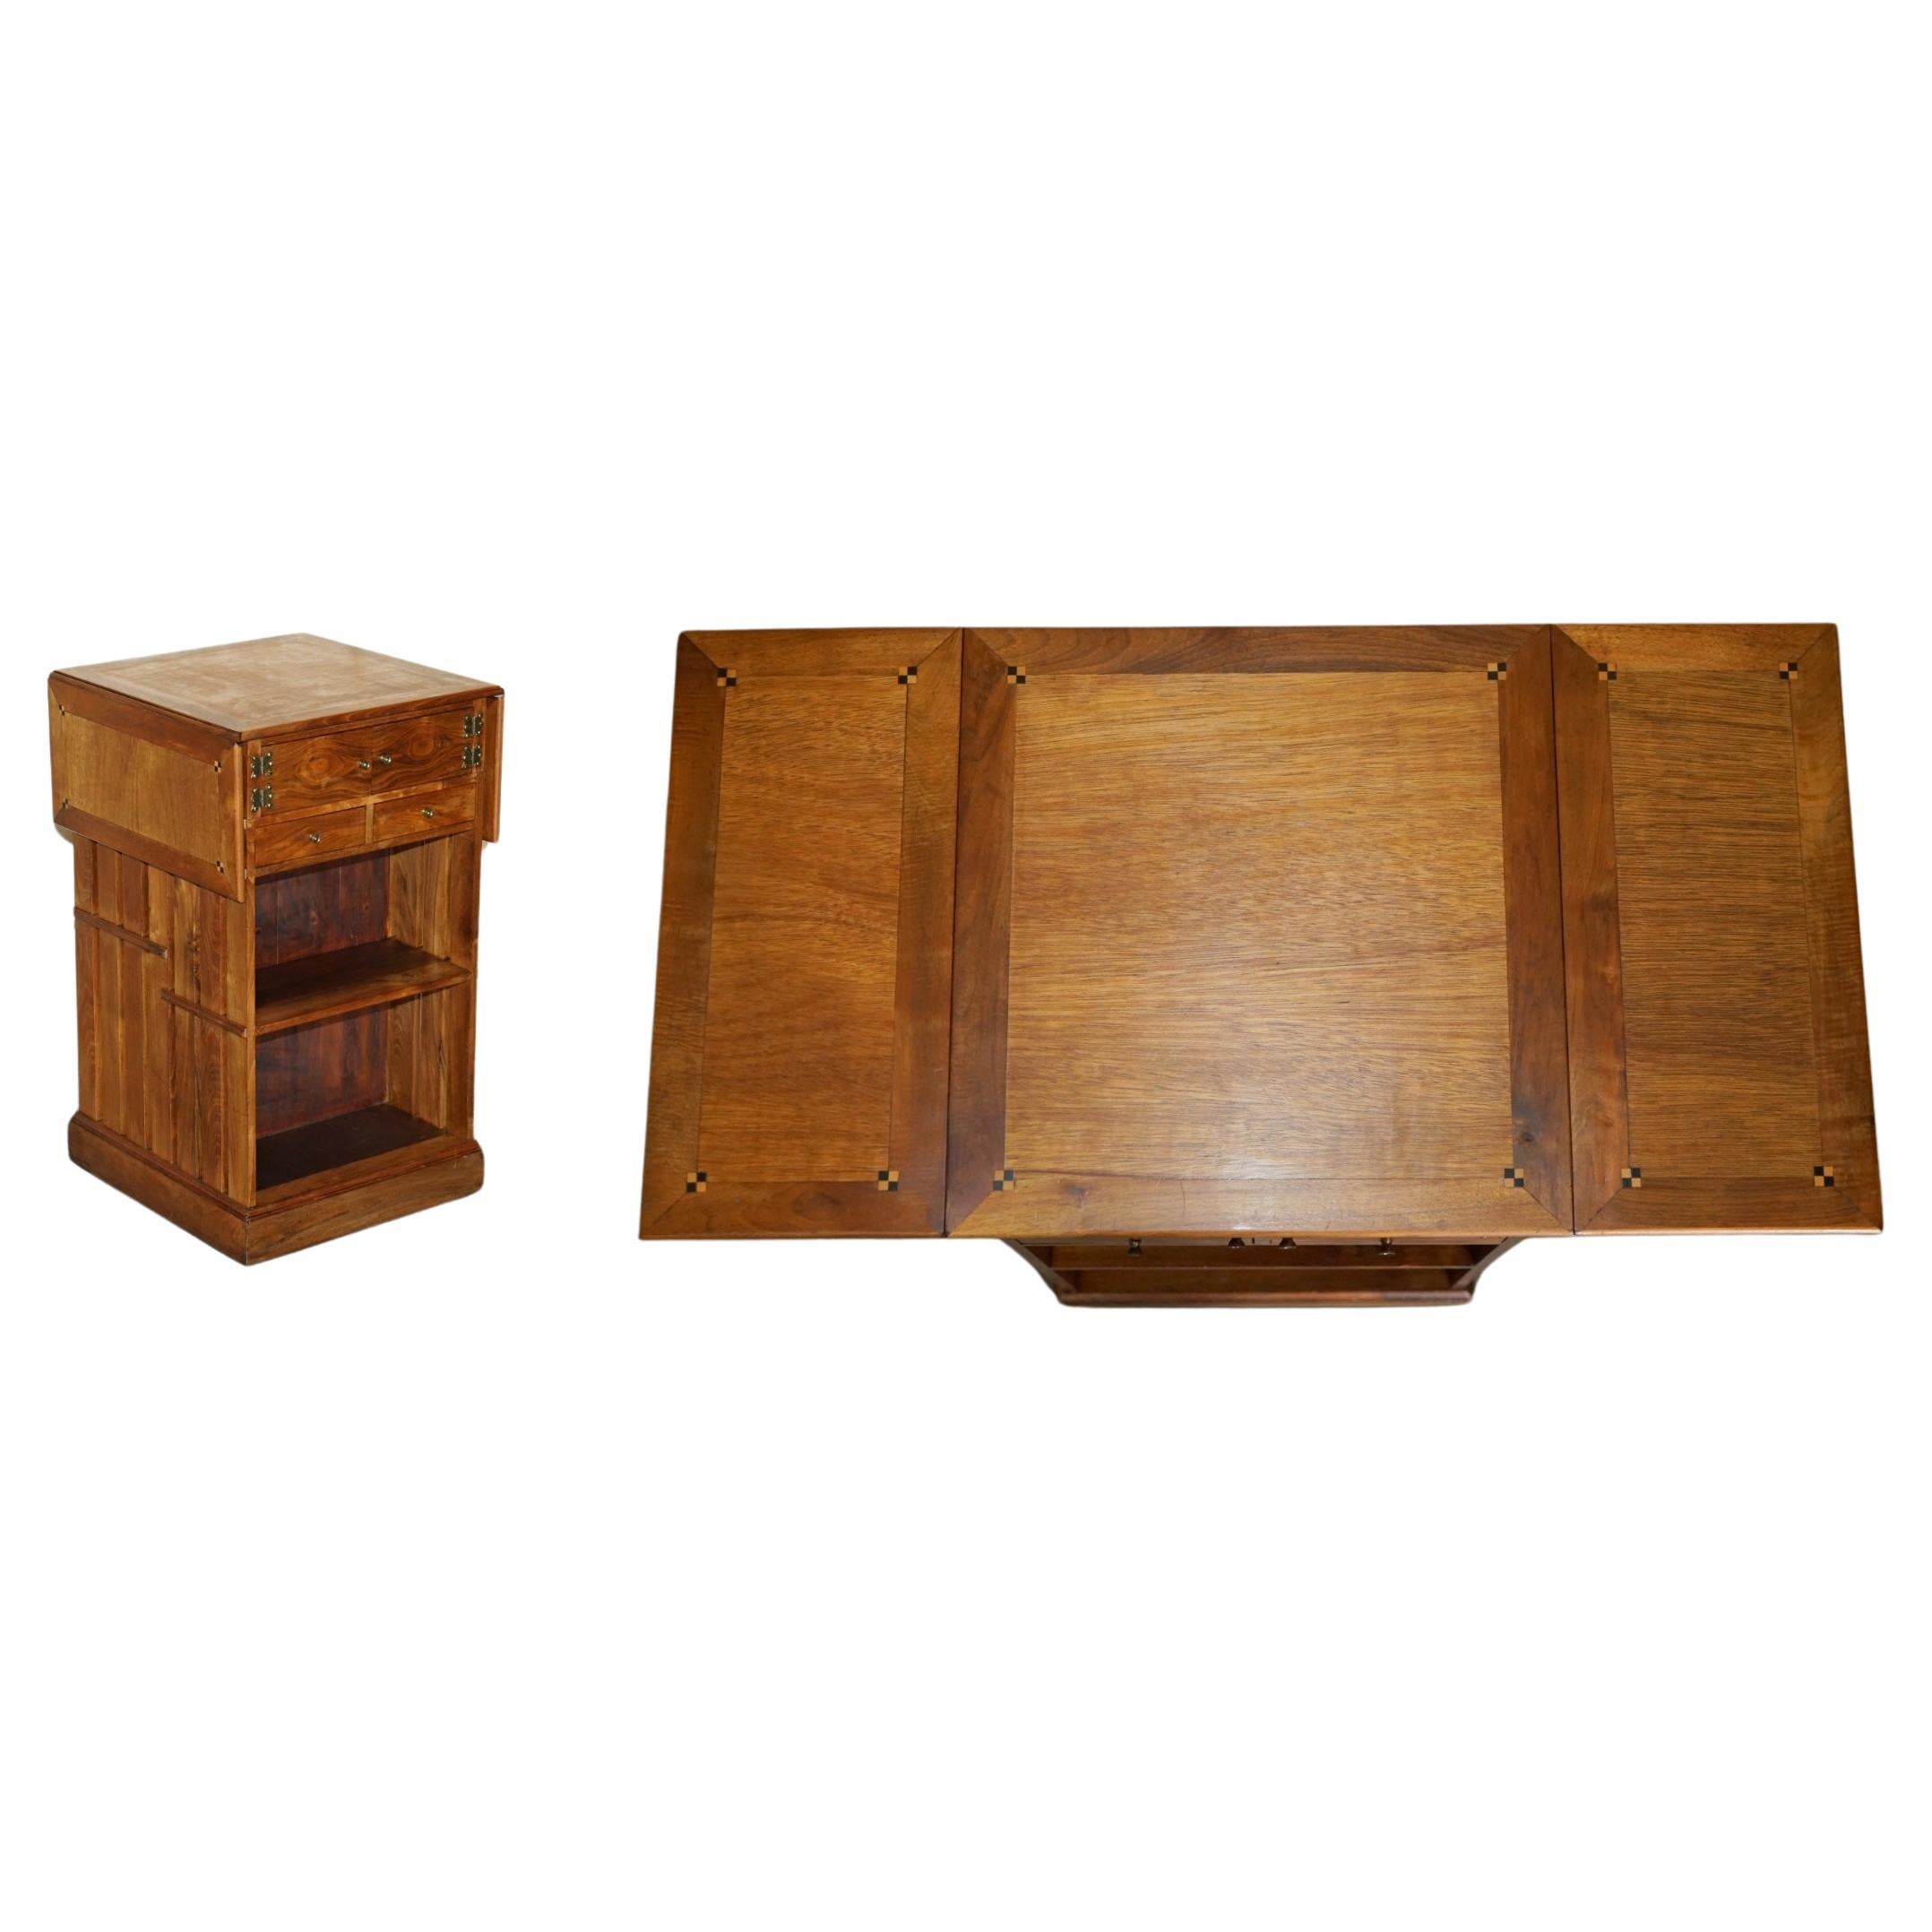 CUSTOM MADE WALNUT PARQUET INLAY EXTENDiNG TOP REVOLVING BOOKCASE TABLE For Sale